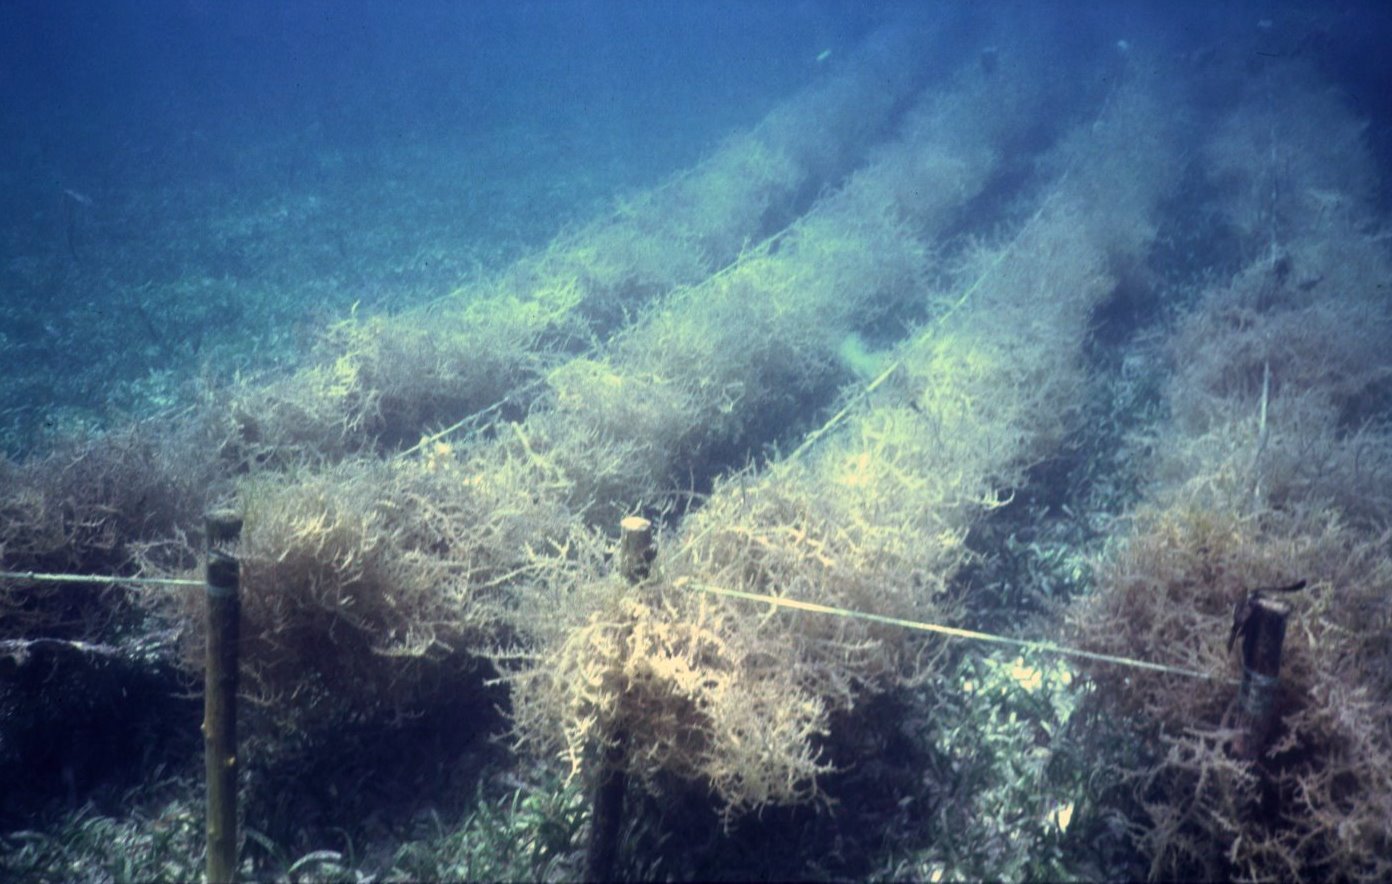 An underwater image of a eucheuma farm. Eucheuma is a type of seaweed, seen here in cultivated rows.